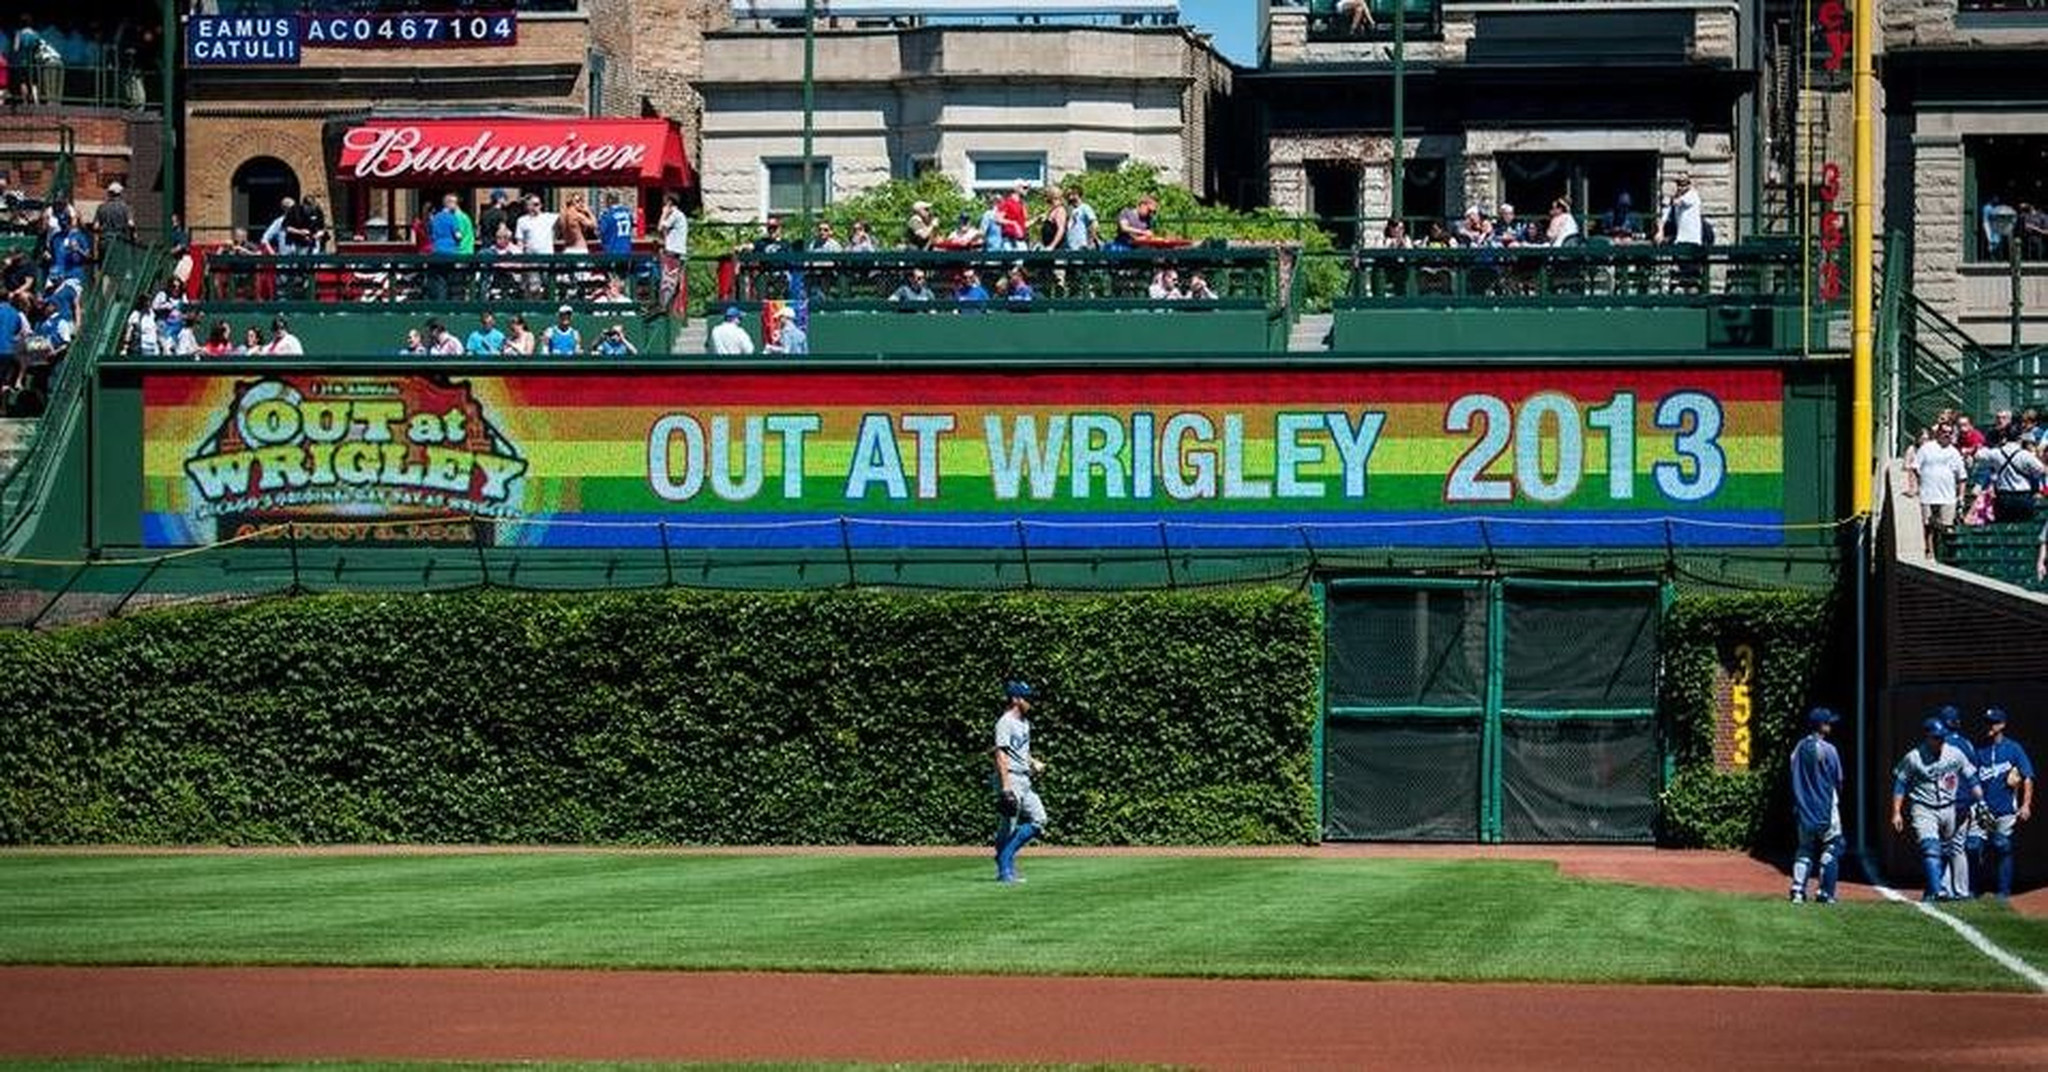 Cubs' Pride Night on June 13 - Windy City Times